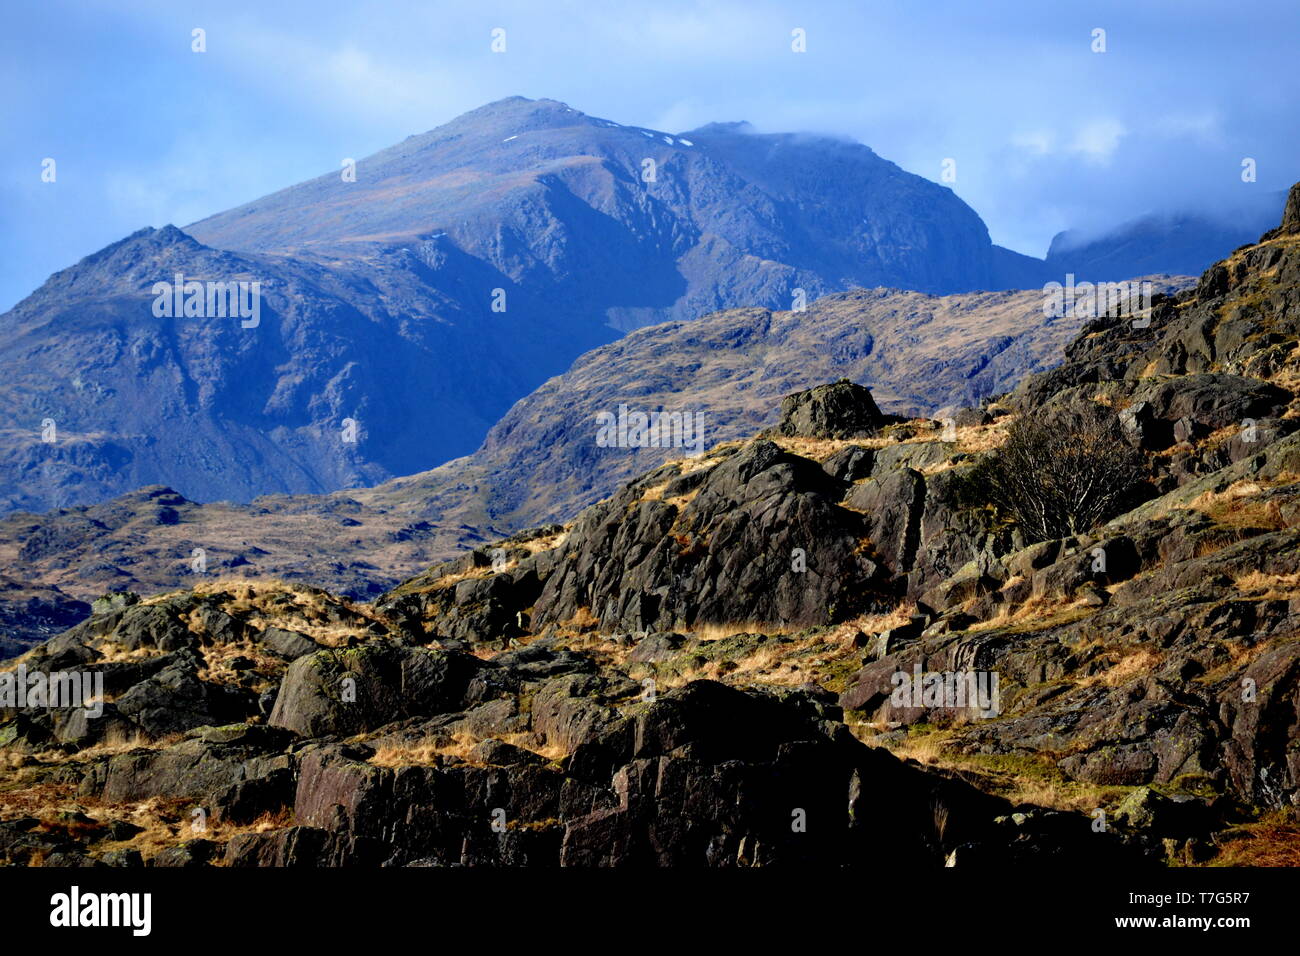 Looking towards Scafell Pike, the highest mountain in England, from the Duddon valley in the Lake District, North West England, United Kingdom Stock Photo